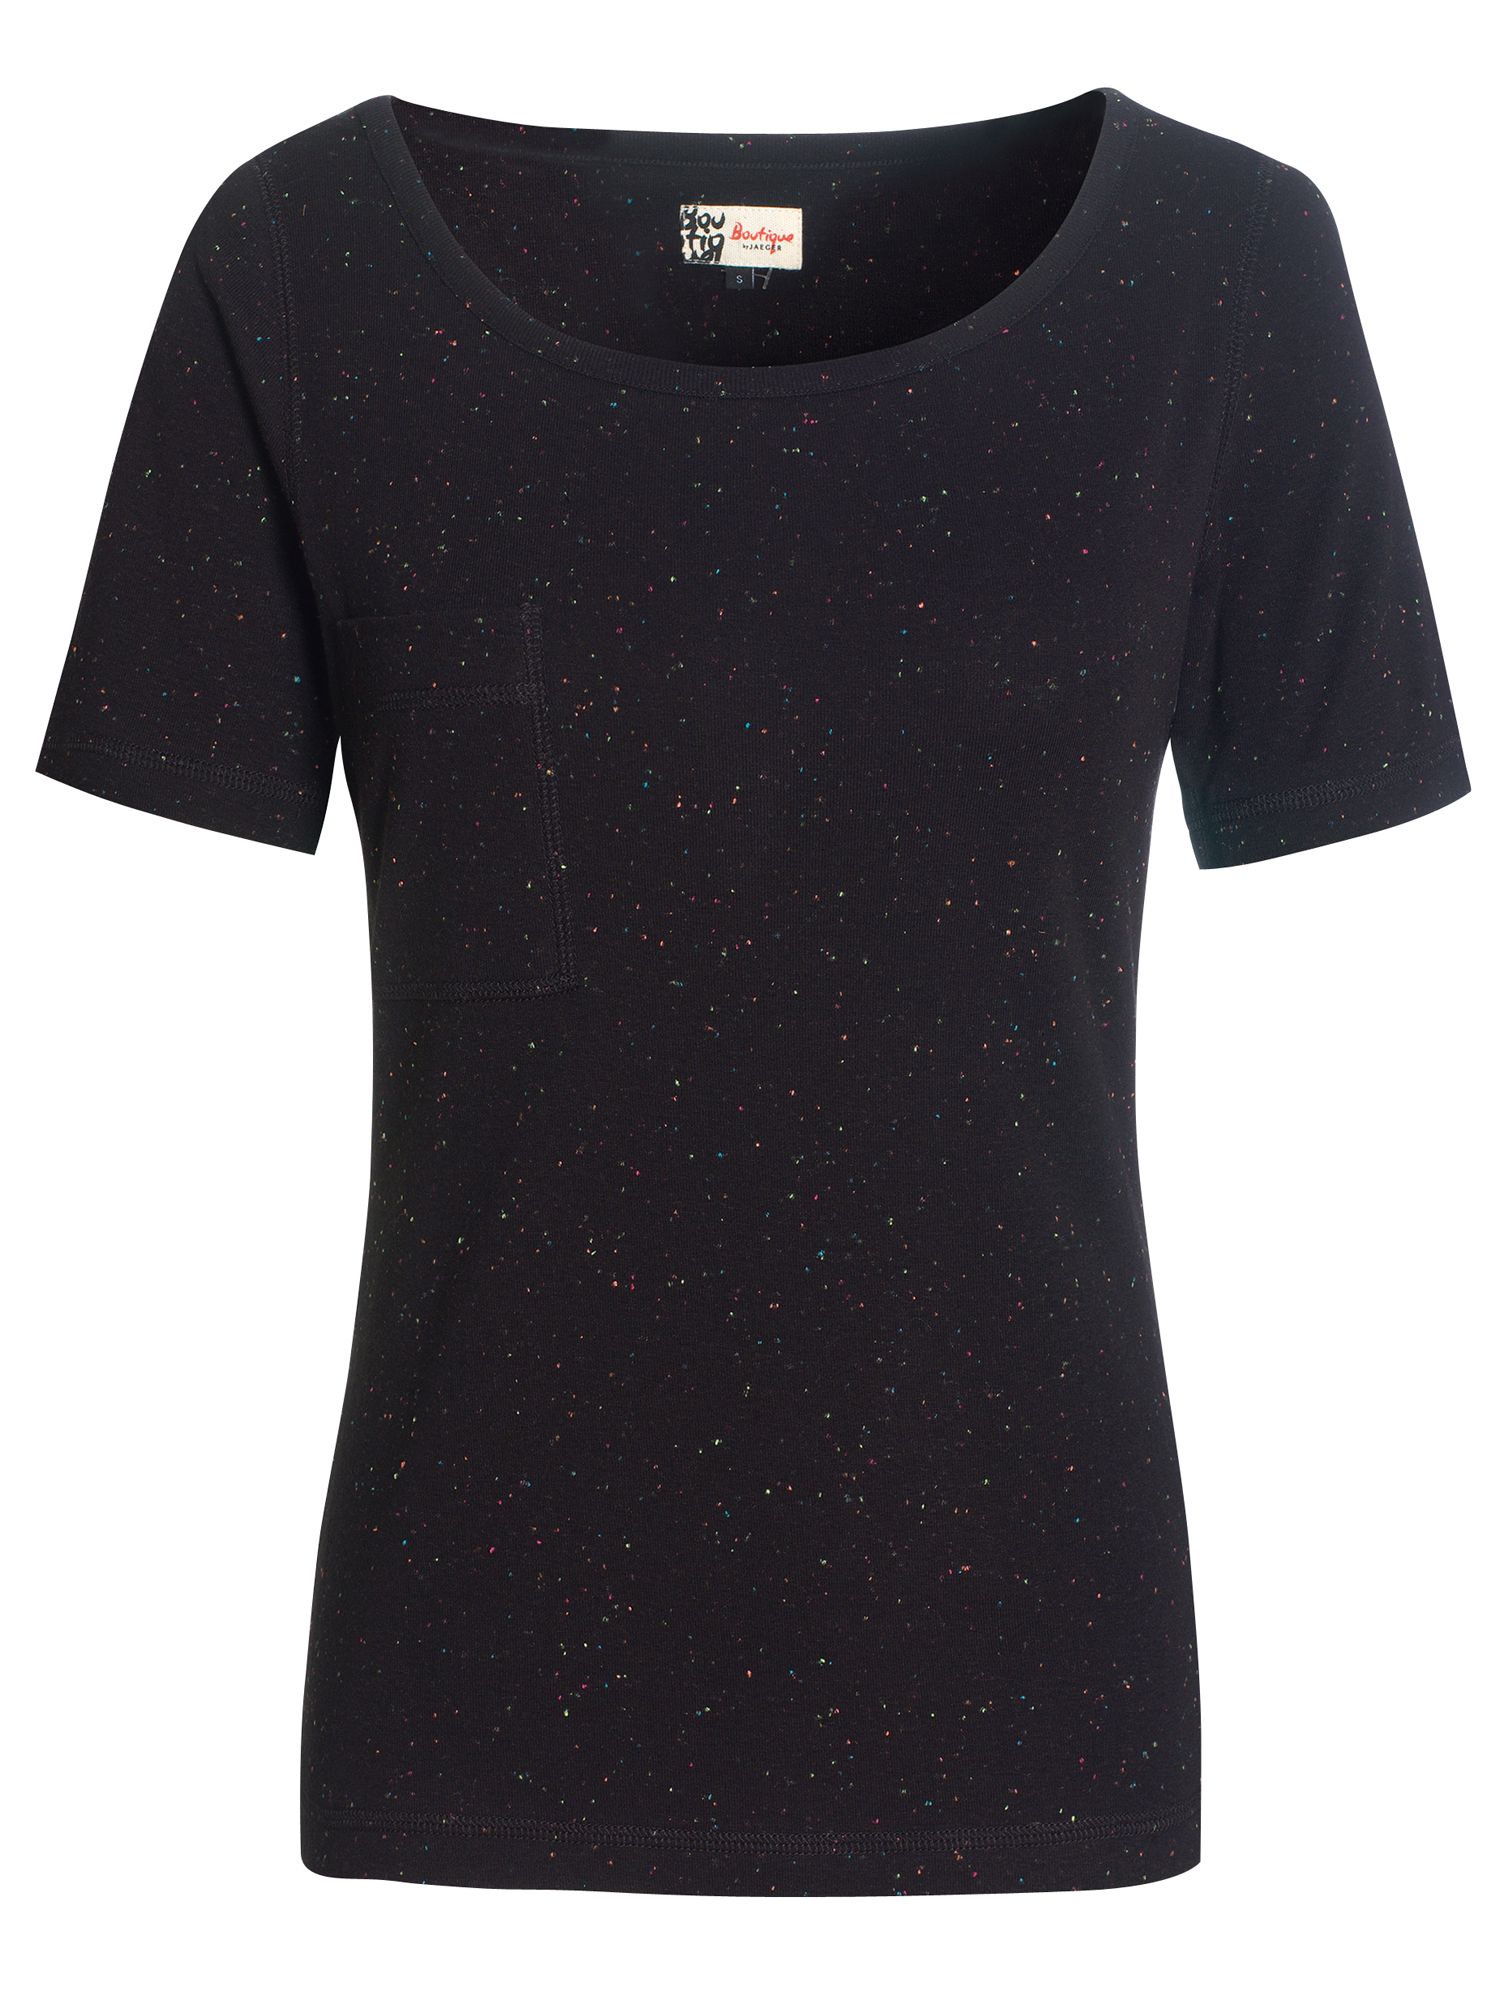 Boutique by Jaeger Fluorescent Flecked T-Shirt,